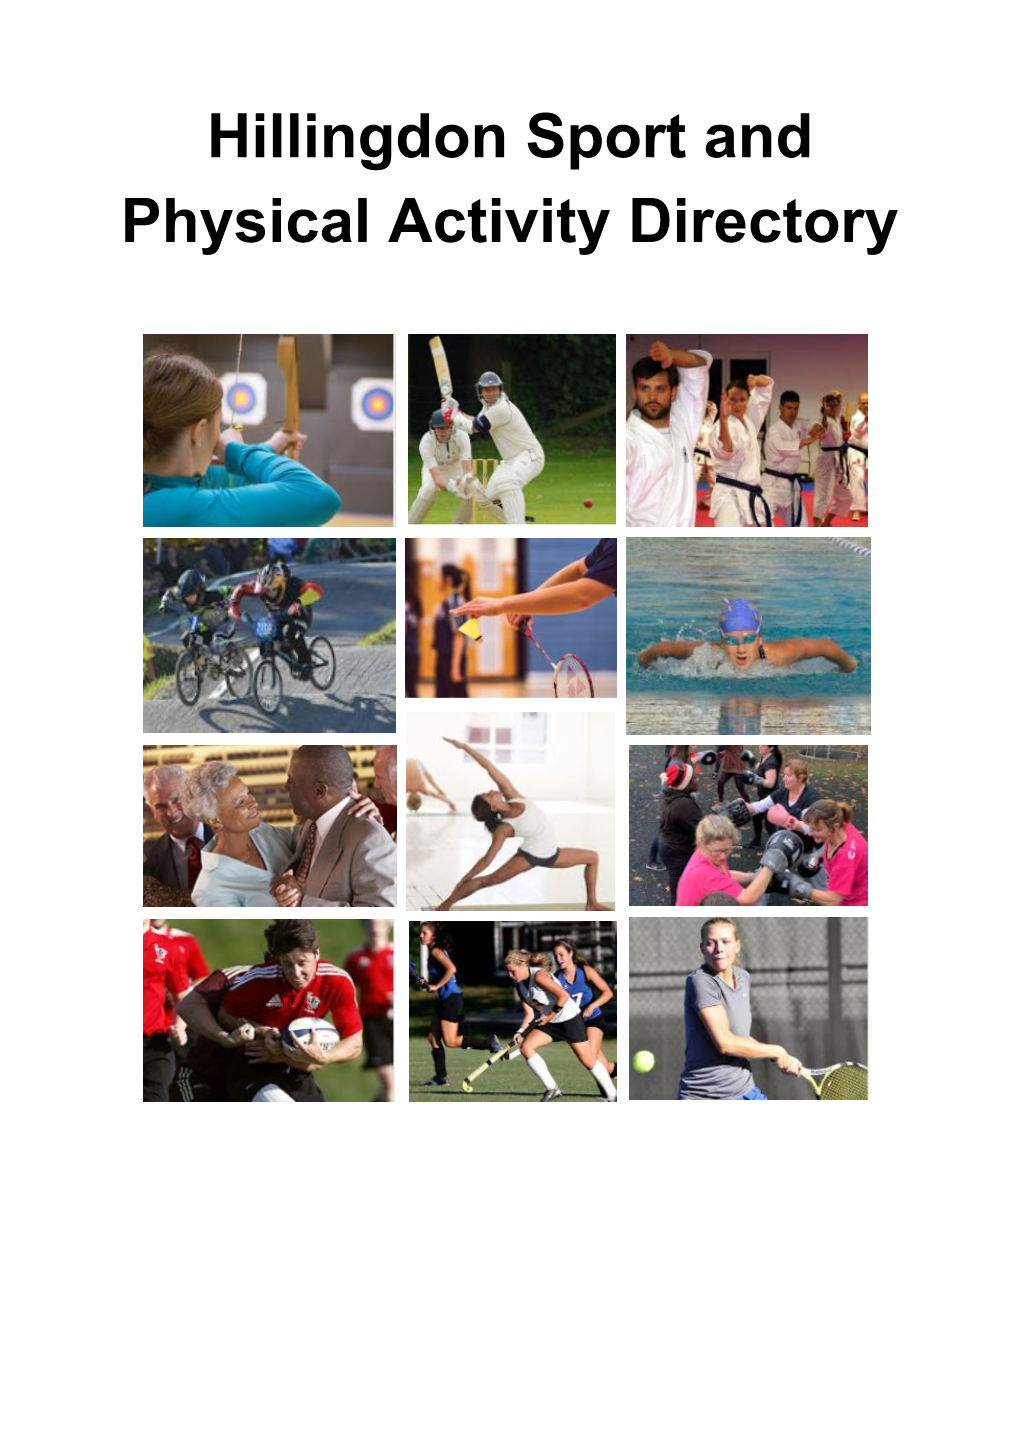 Hillingdon Sport and Physical Activity Directory